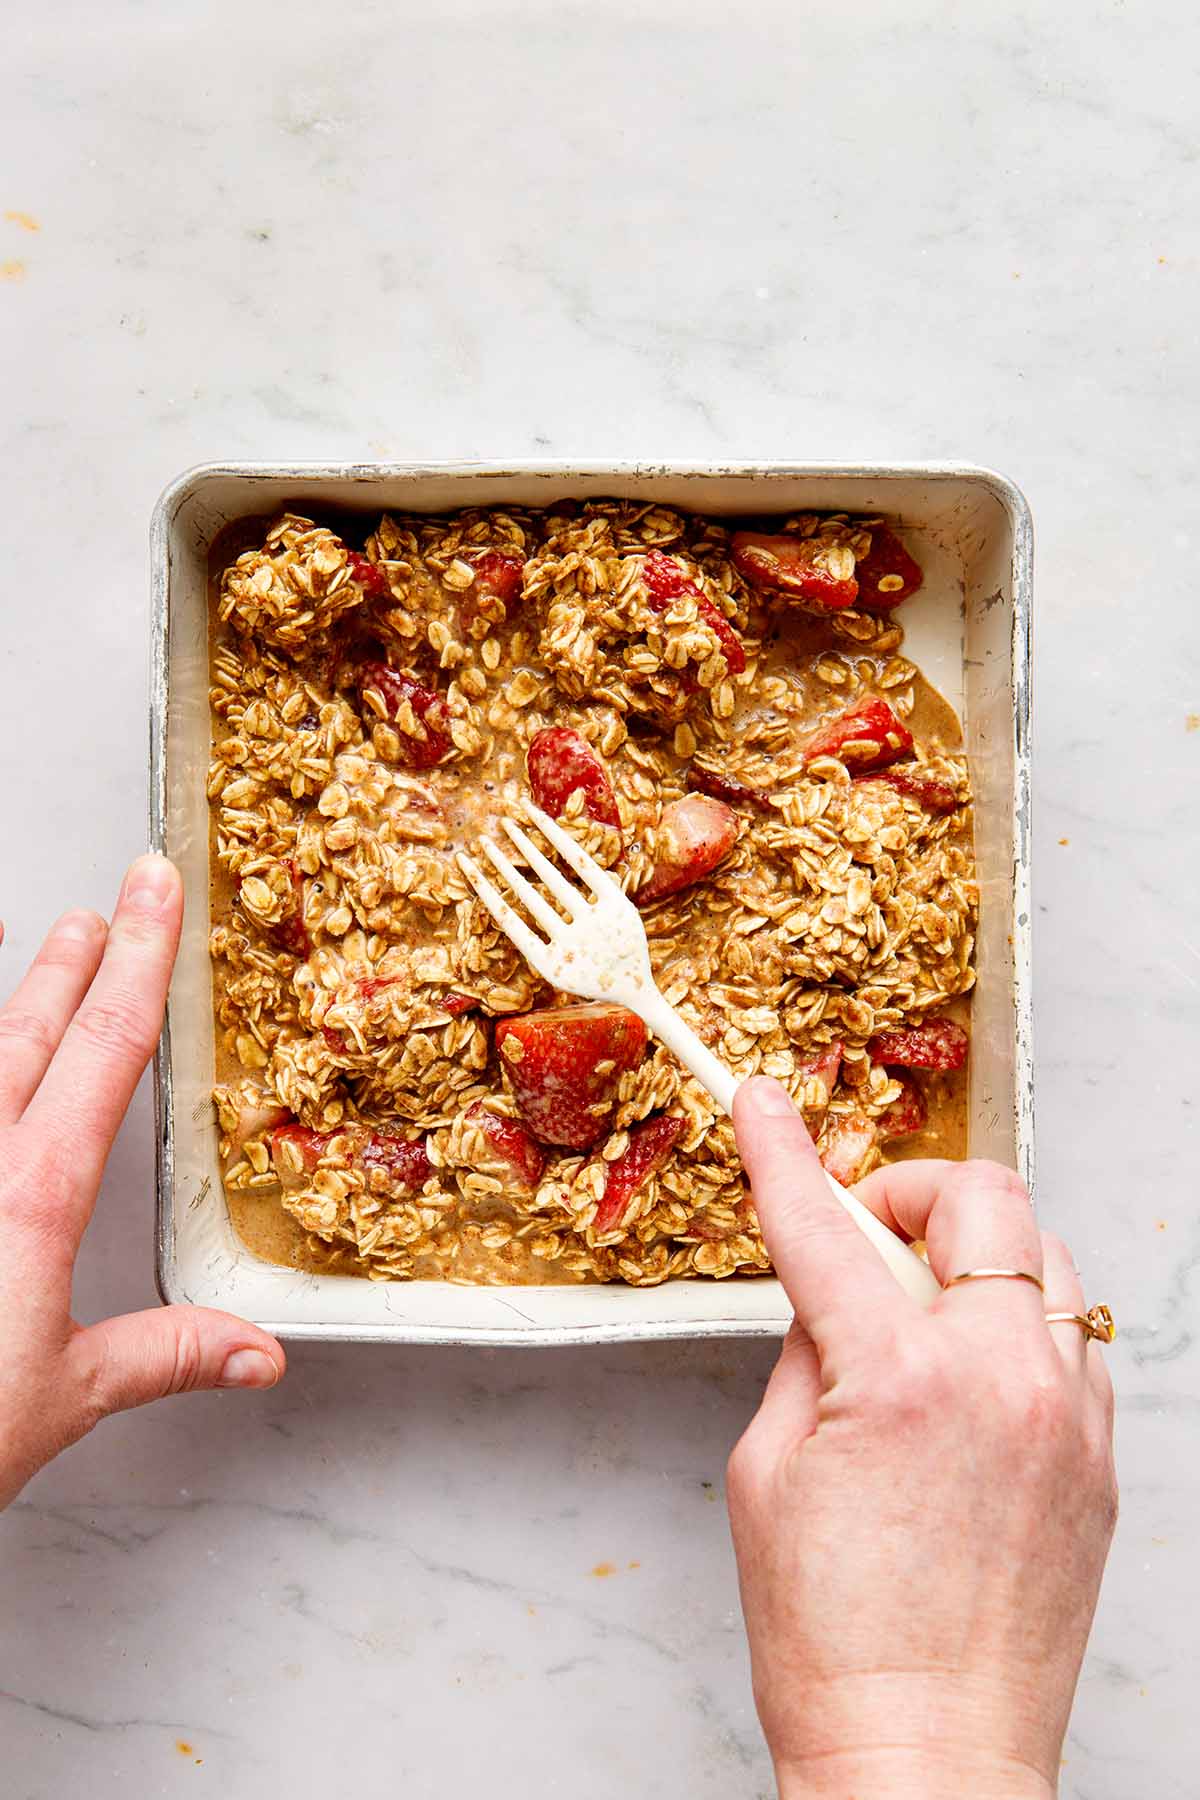 A hand using a fork to spread oatmeal and strawberries evenly in a greased baking tin.